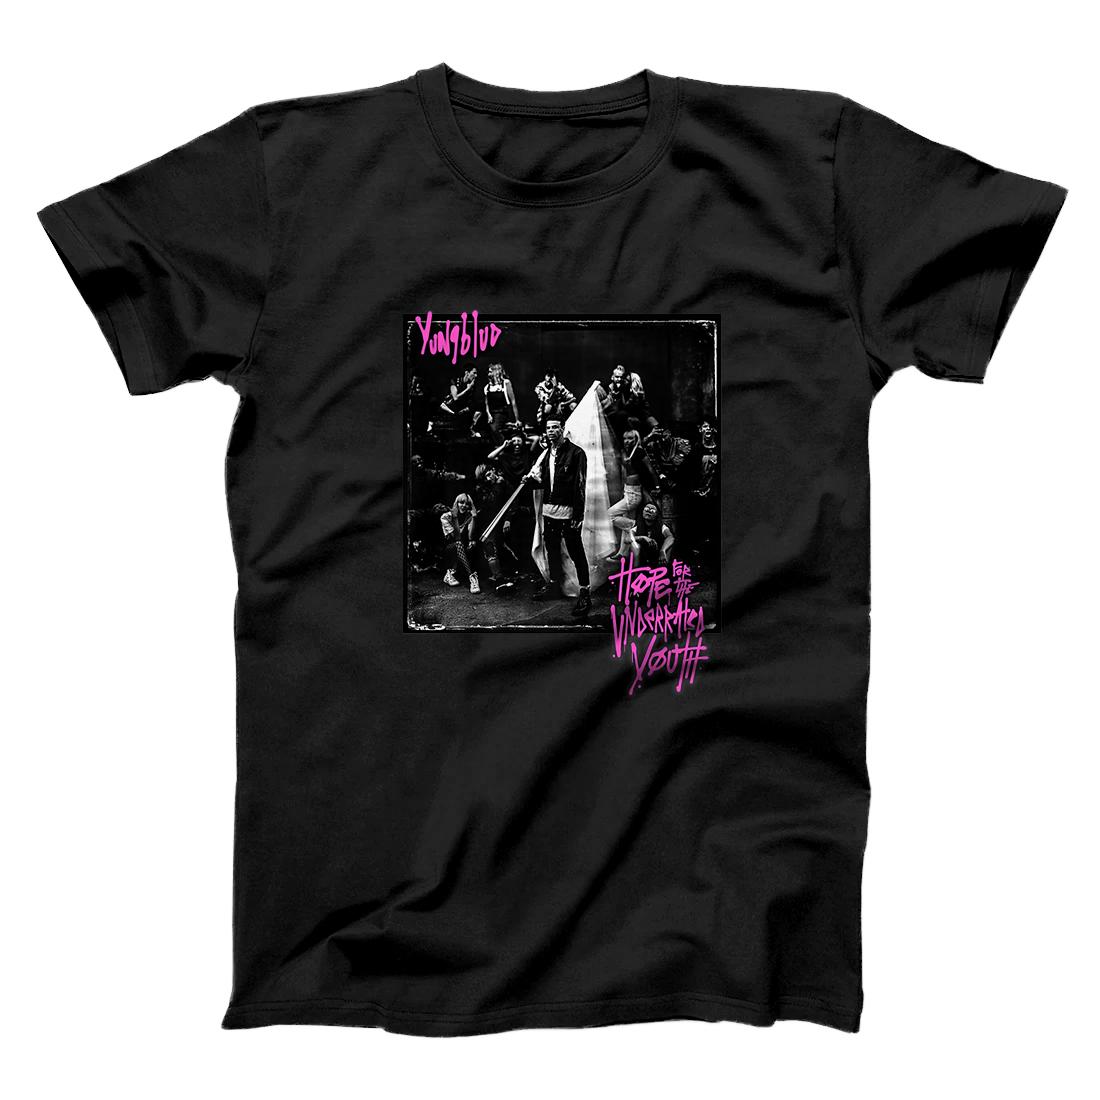 Personalized Yungblud Hope For The Underrated Youth Album Premium T-Shirt